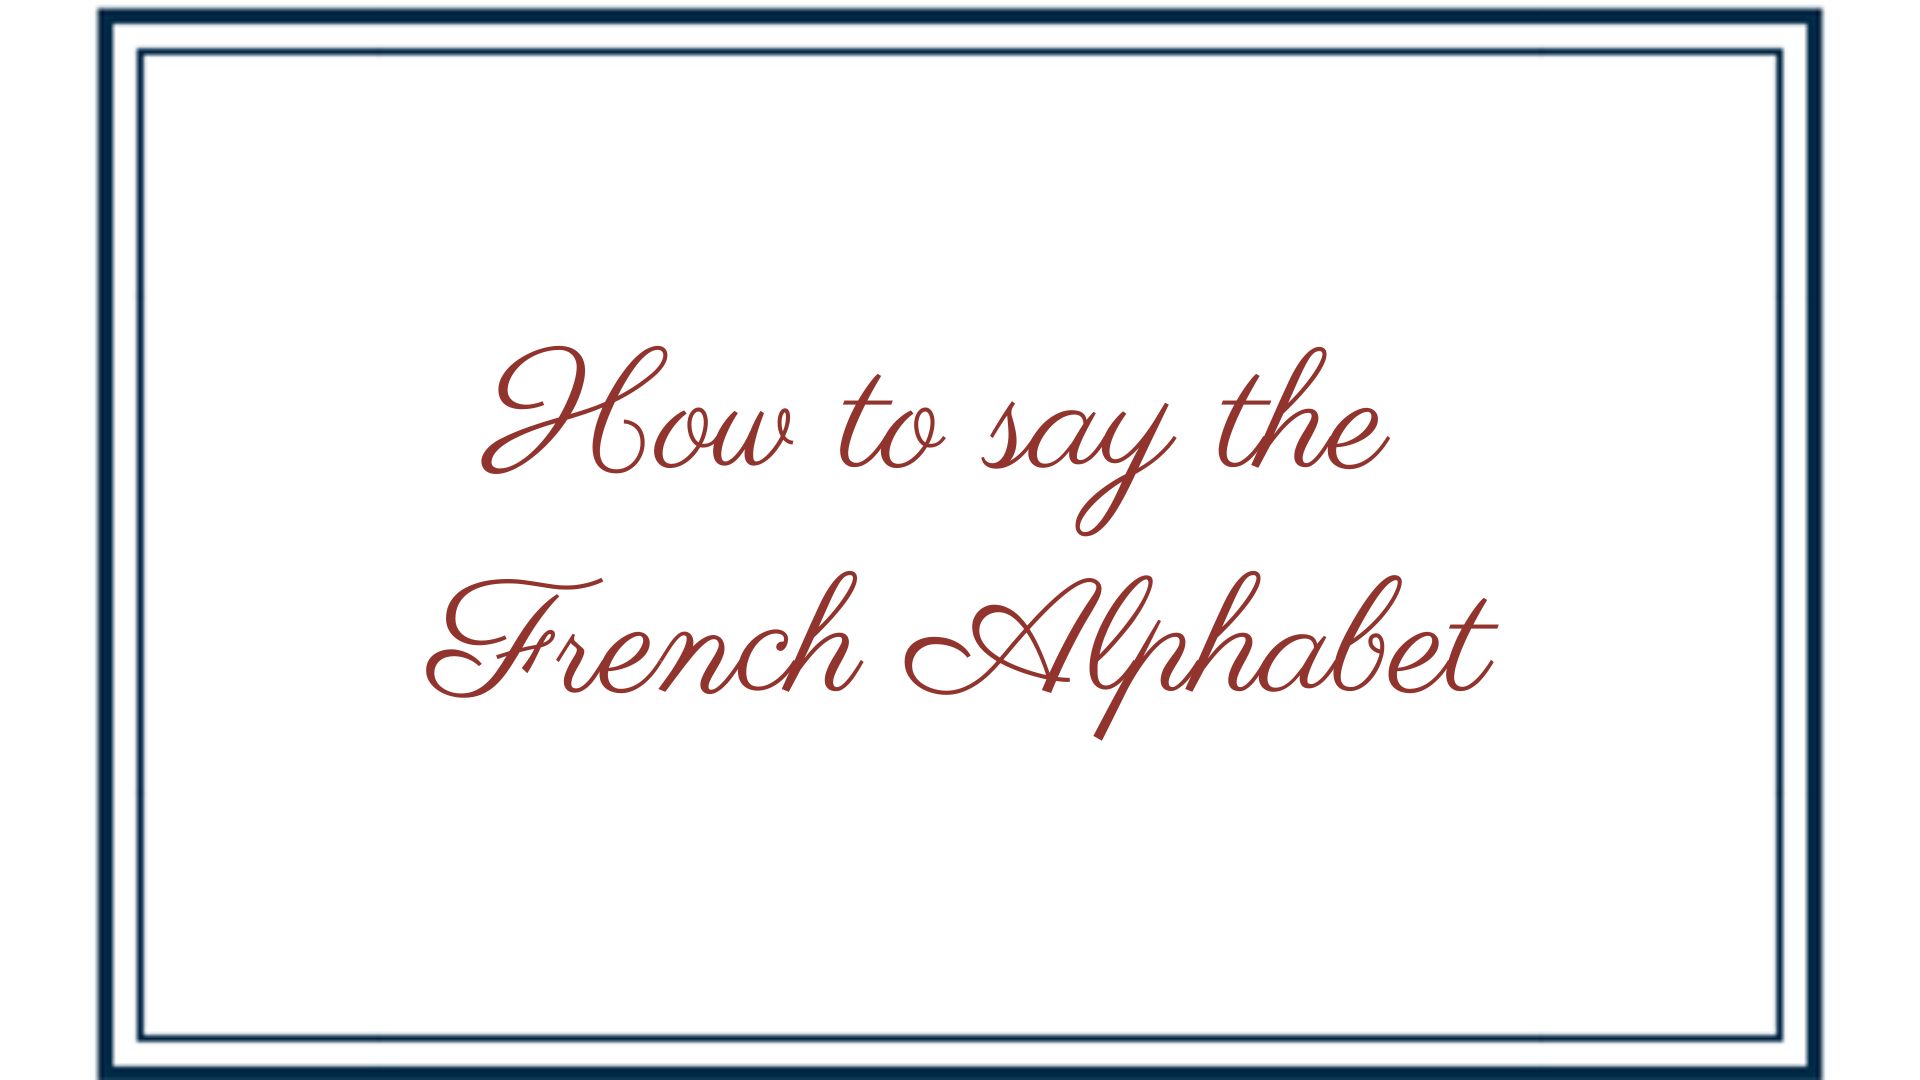 How to say the French Alphabet